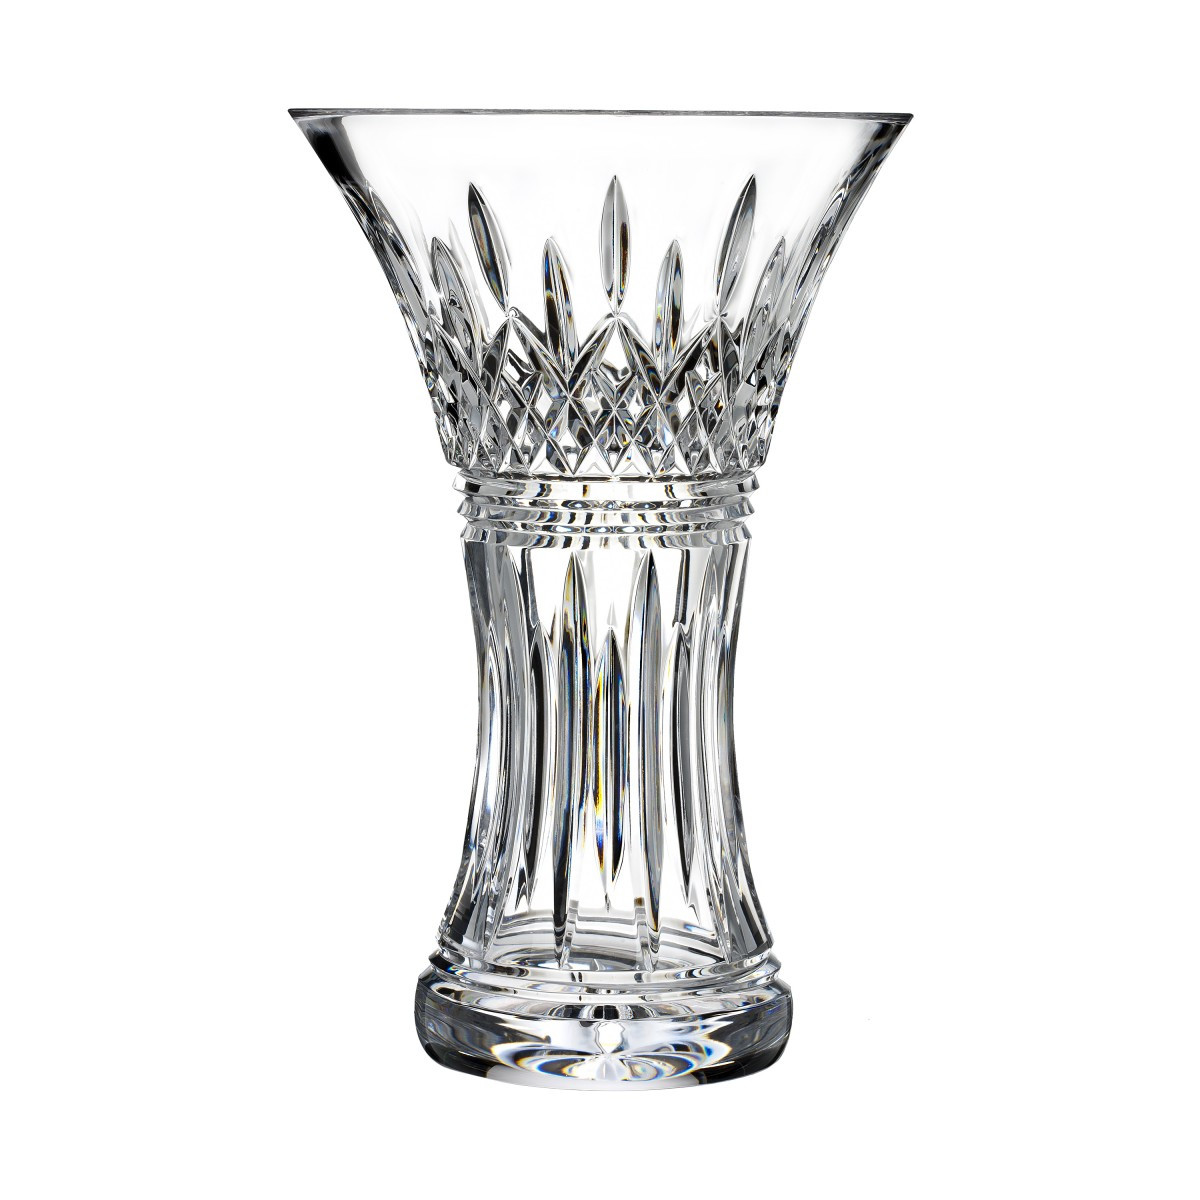 13 Lovable Waterford Marquis Markham Vase 2024 free download waterford marquis markham vase of lismore 12in vase house of waterford crystal us in lismore 12in vase